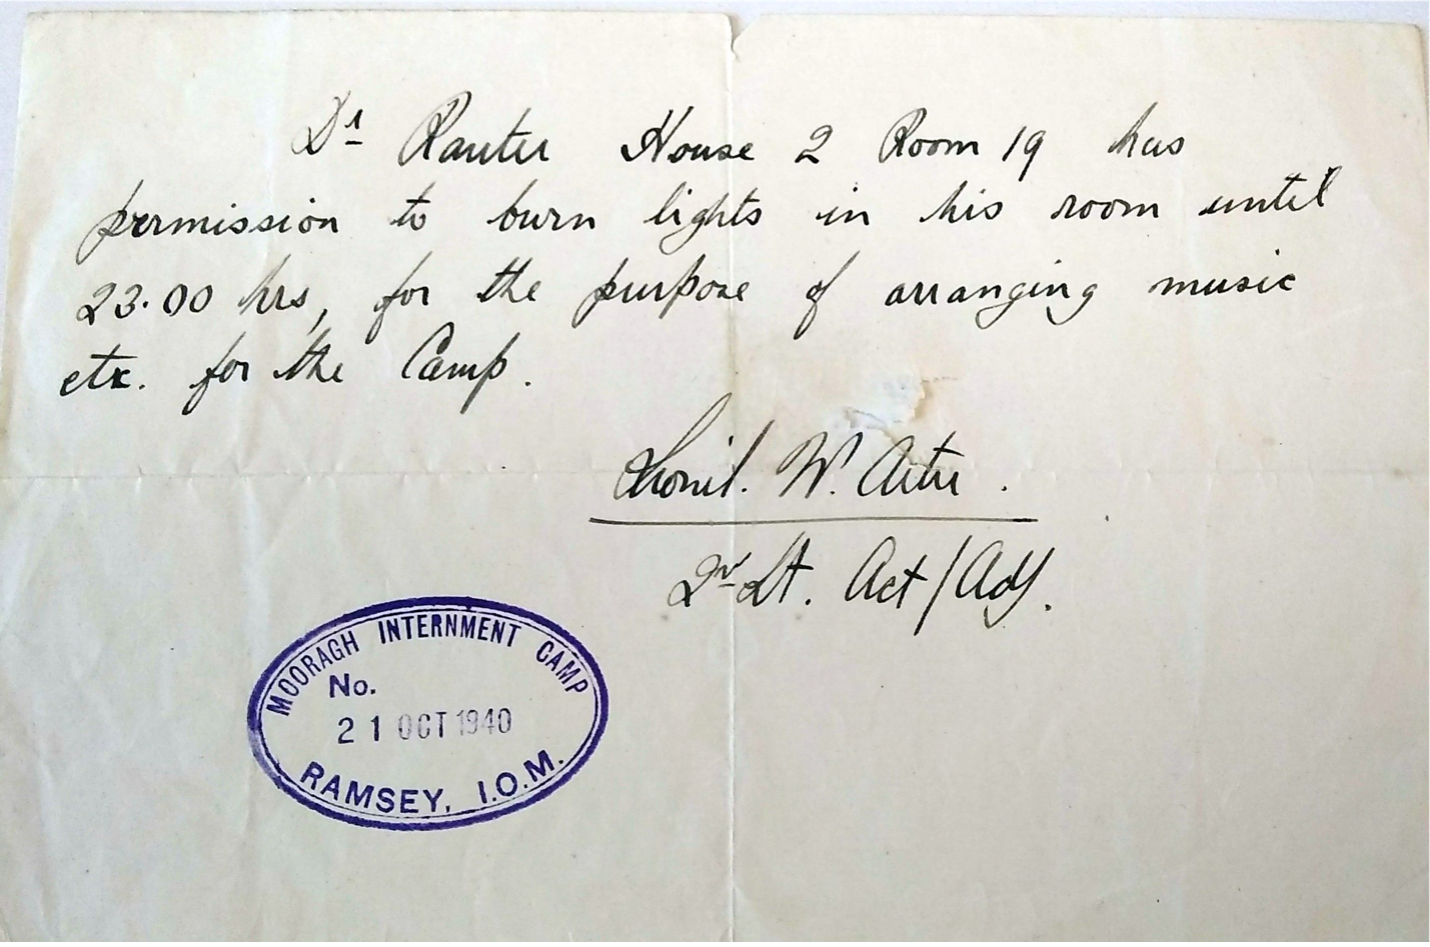 Hand written pass issued to Ferdinand Rauter allowing him to burn lights until 23.00 hours in order to arrange music, 21 October 1940.